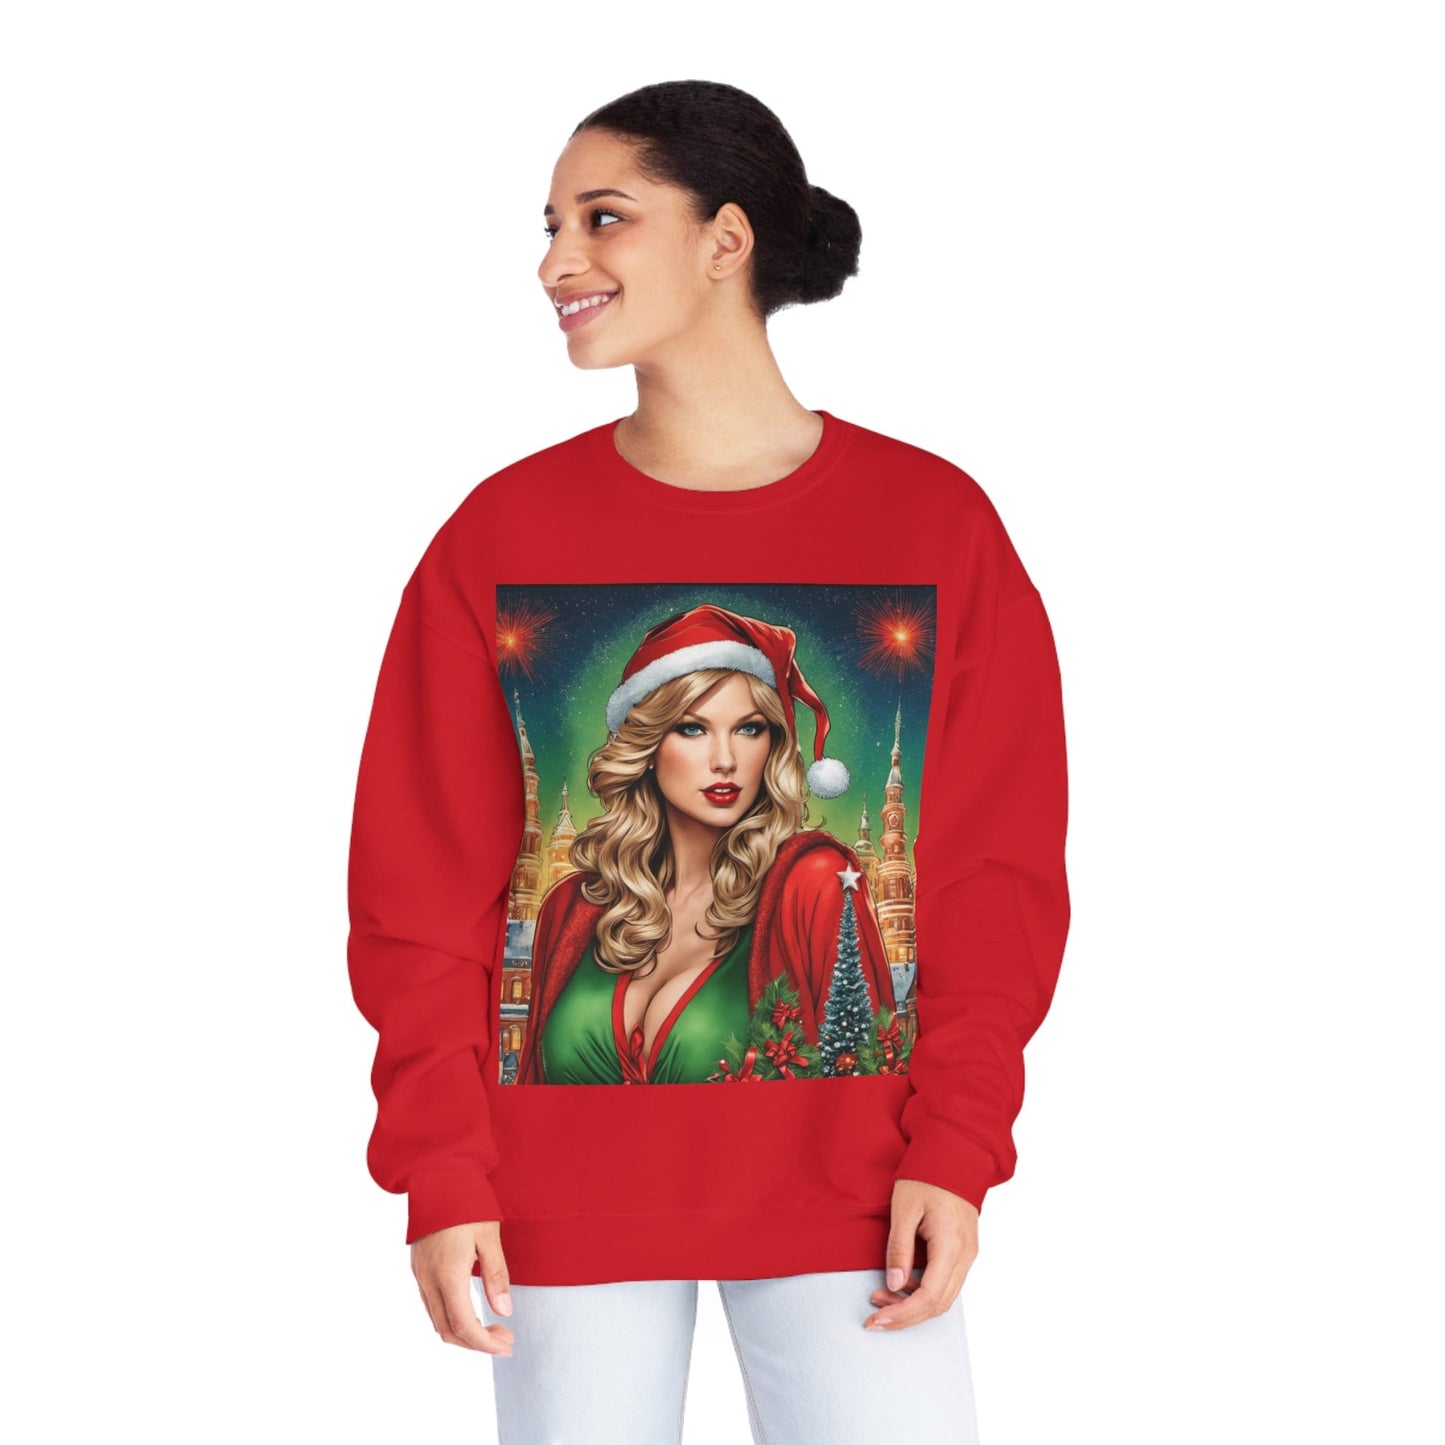 Ugly Swiftmas Sweater Perfect for Christmas Gift for Swiftie Men/Women Green or Red